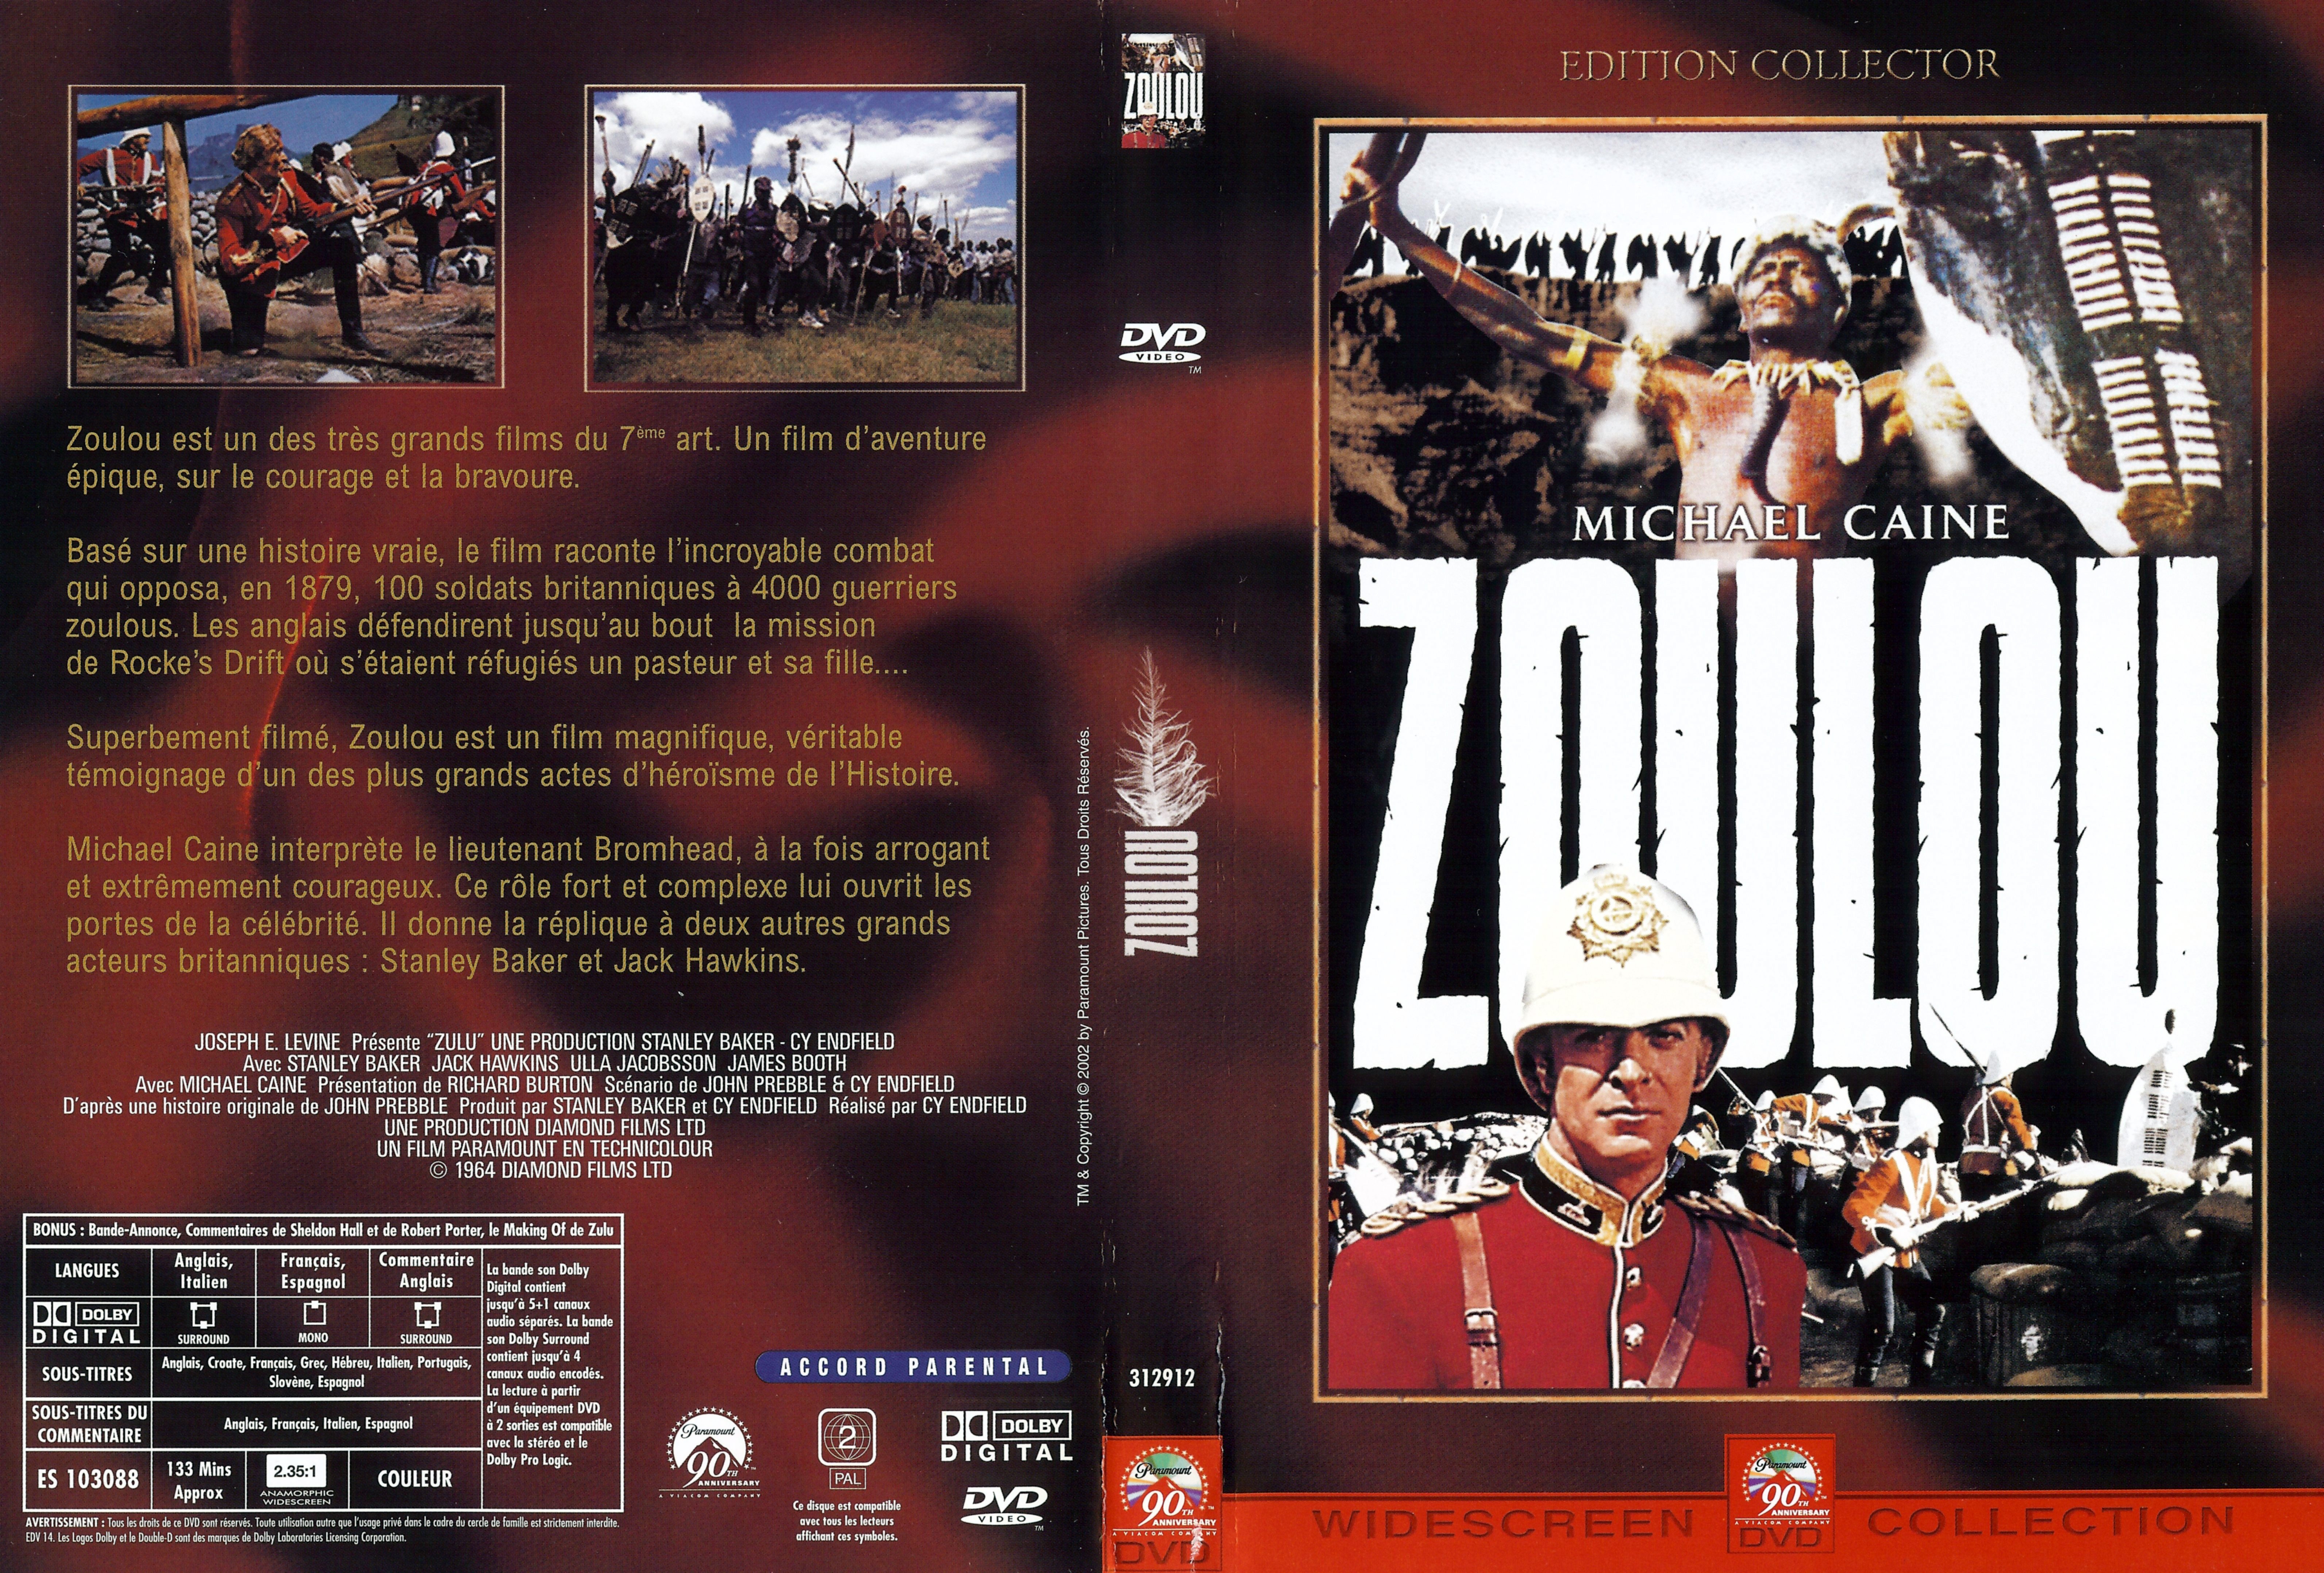 Jaquette DVD Zoulou